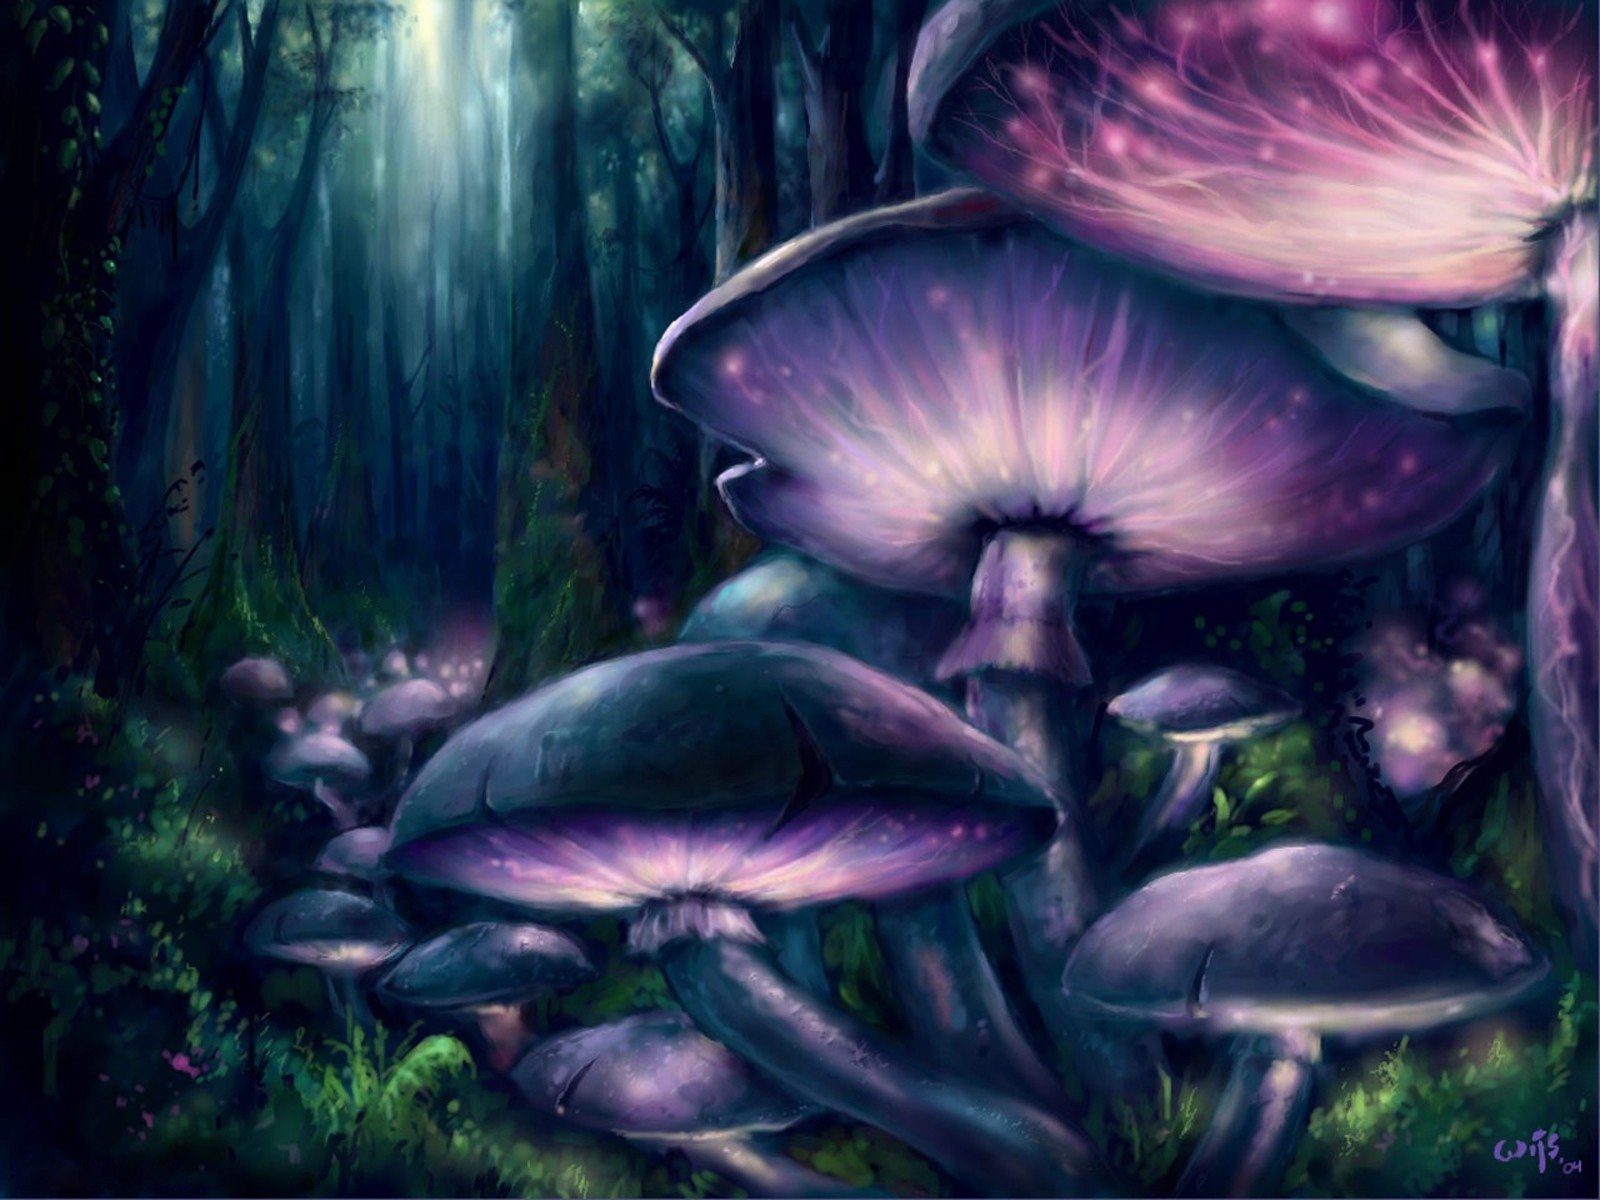 Purple and Blue Mushrooms in Fantasy Forest by Leo de Wijs Wallpaper and Background Imagex1200